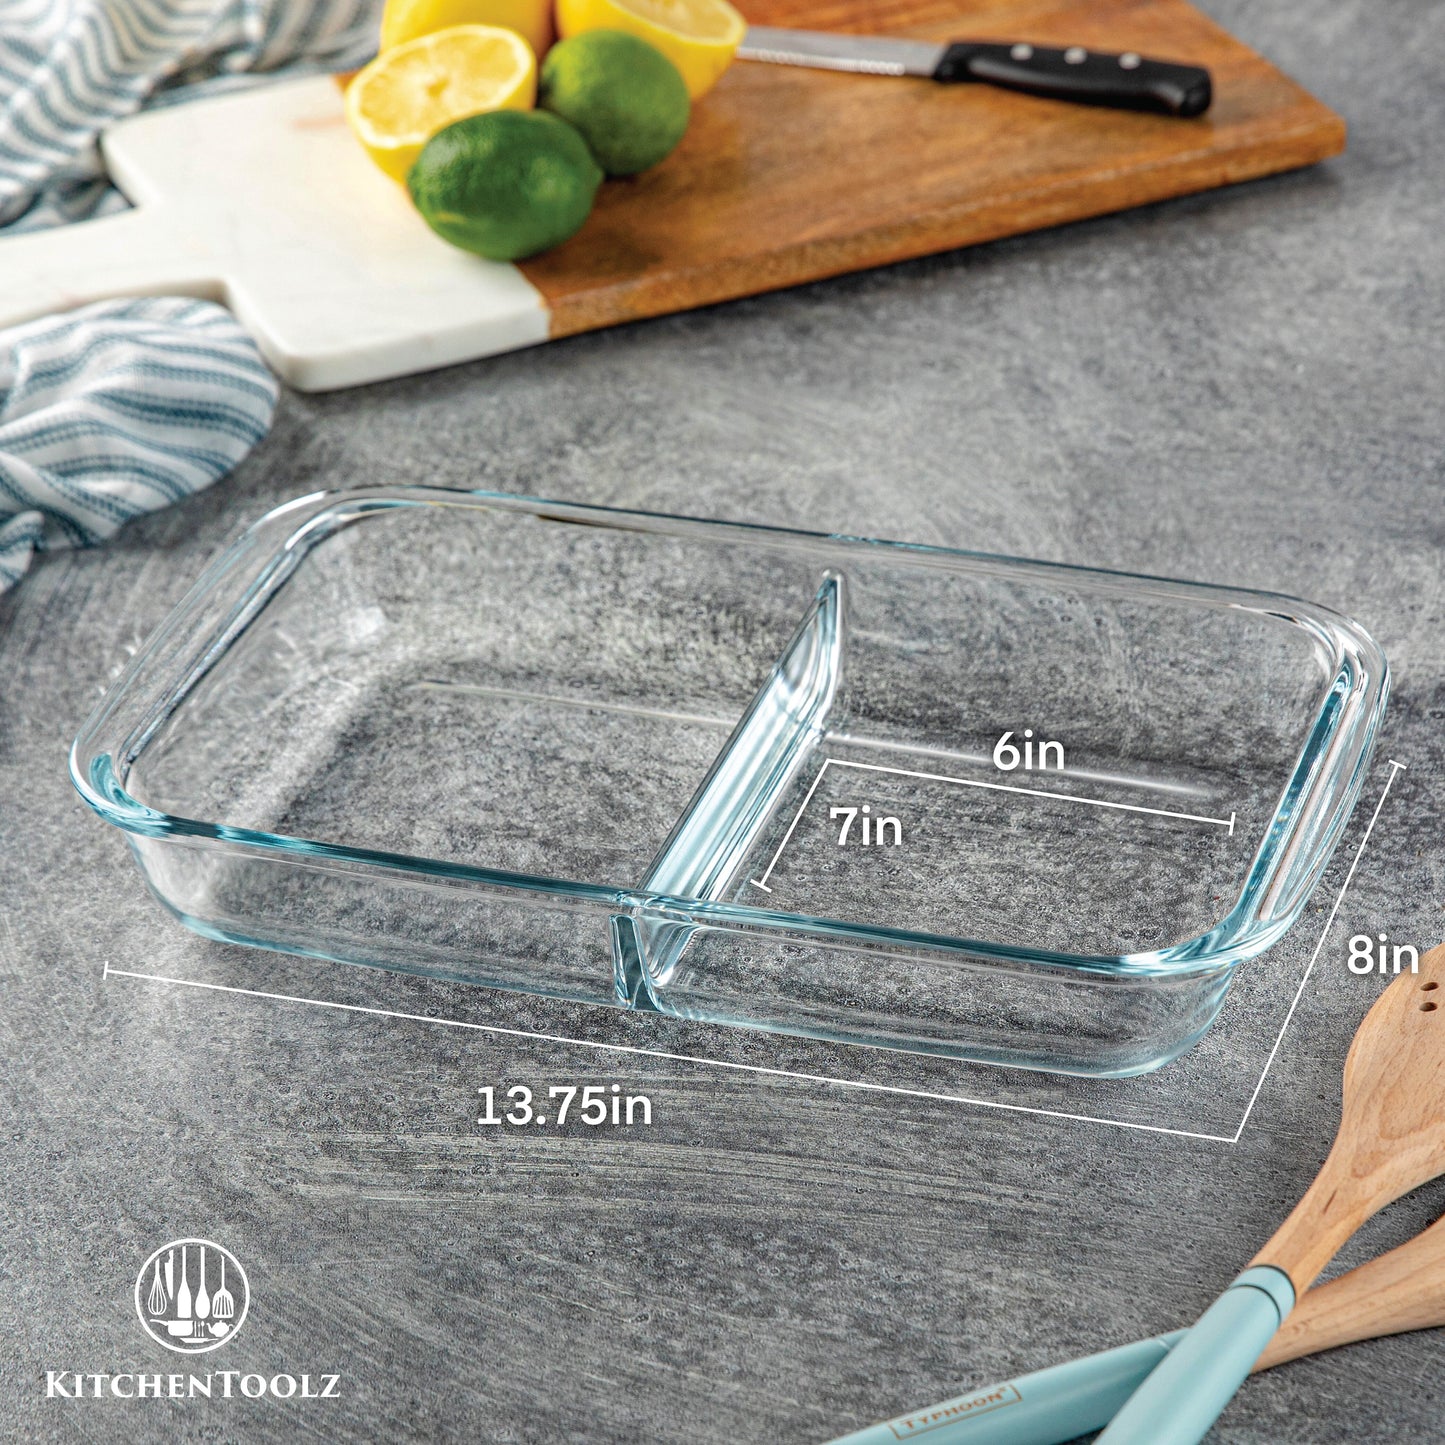 Borosilicate Glass Casserole Dish with Divider - Pack of 2